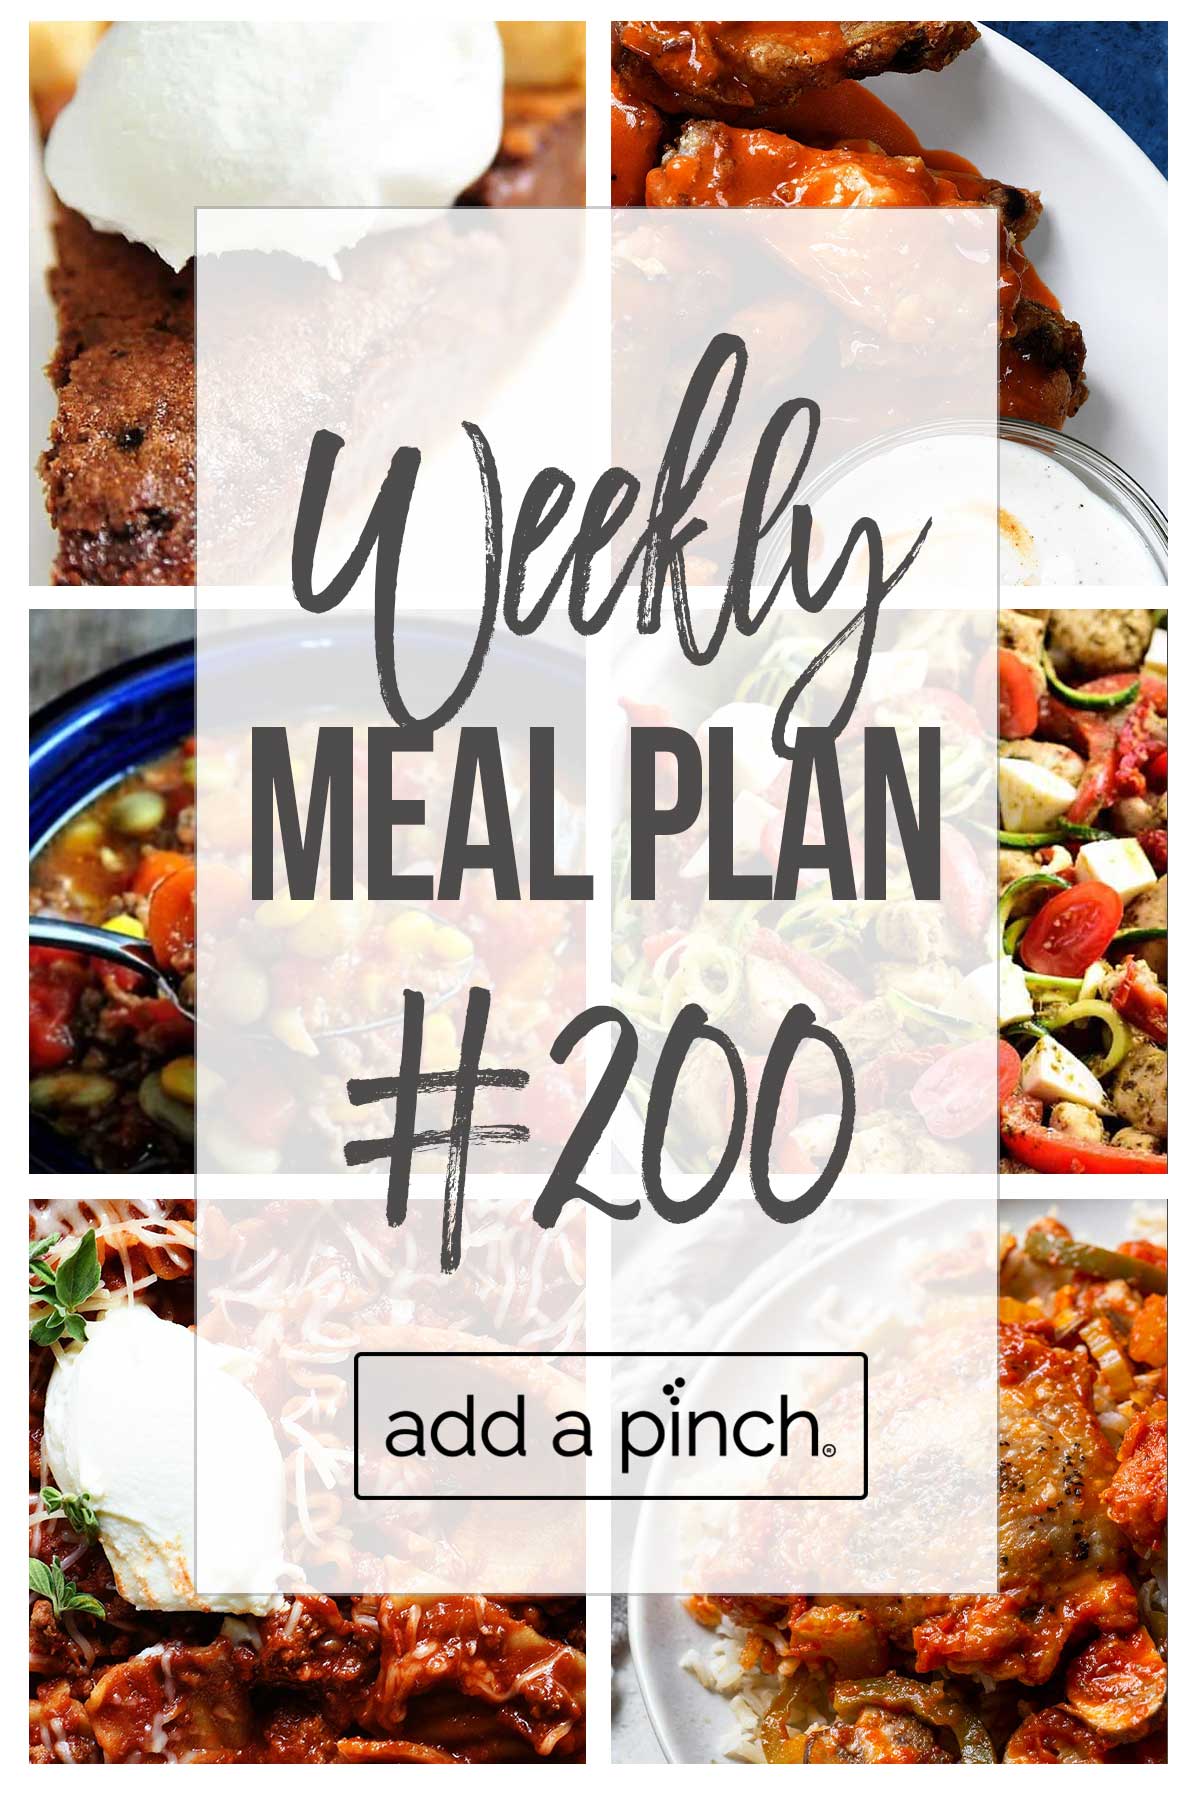 Graphic of Weekly Meal Plan #200.